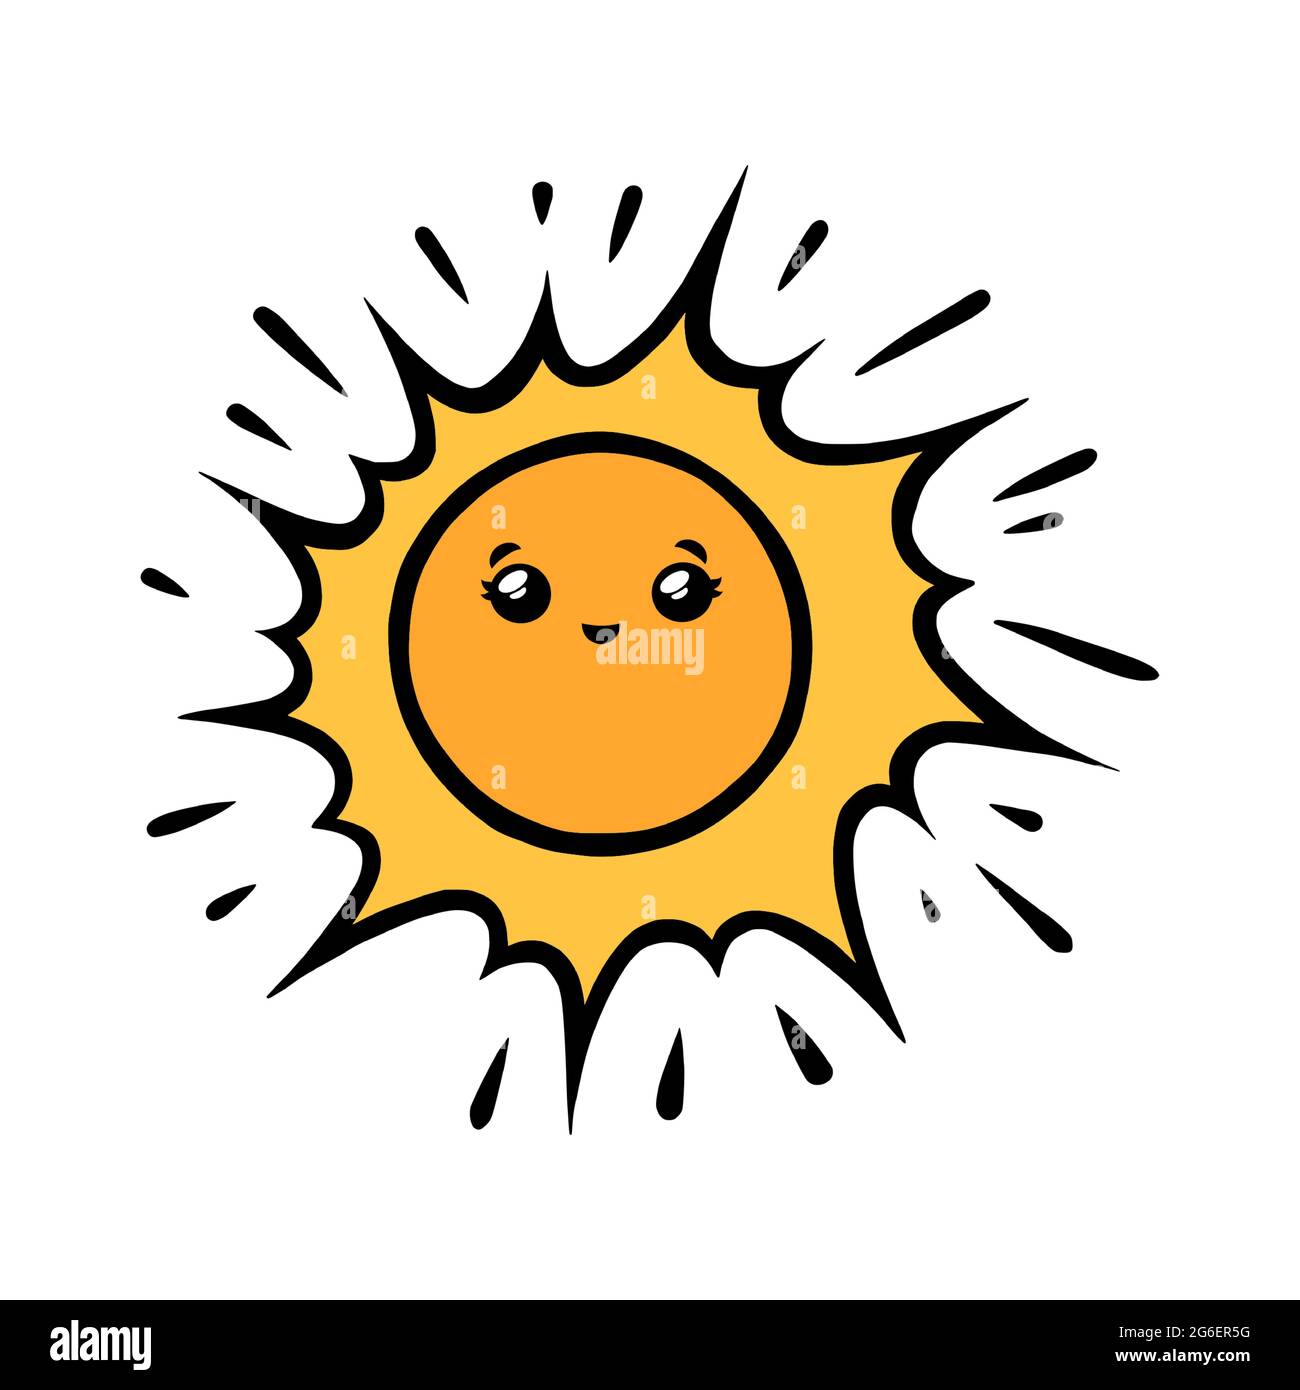 Funny sun character. Kawaii sun smiling face in doodle style. Black and white vector illustration isolated in white background Stock Vector